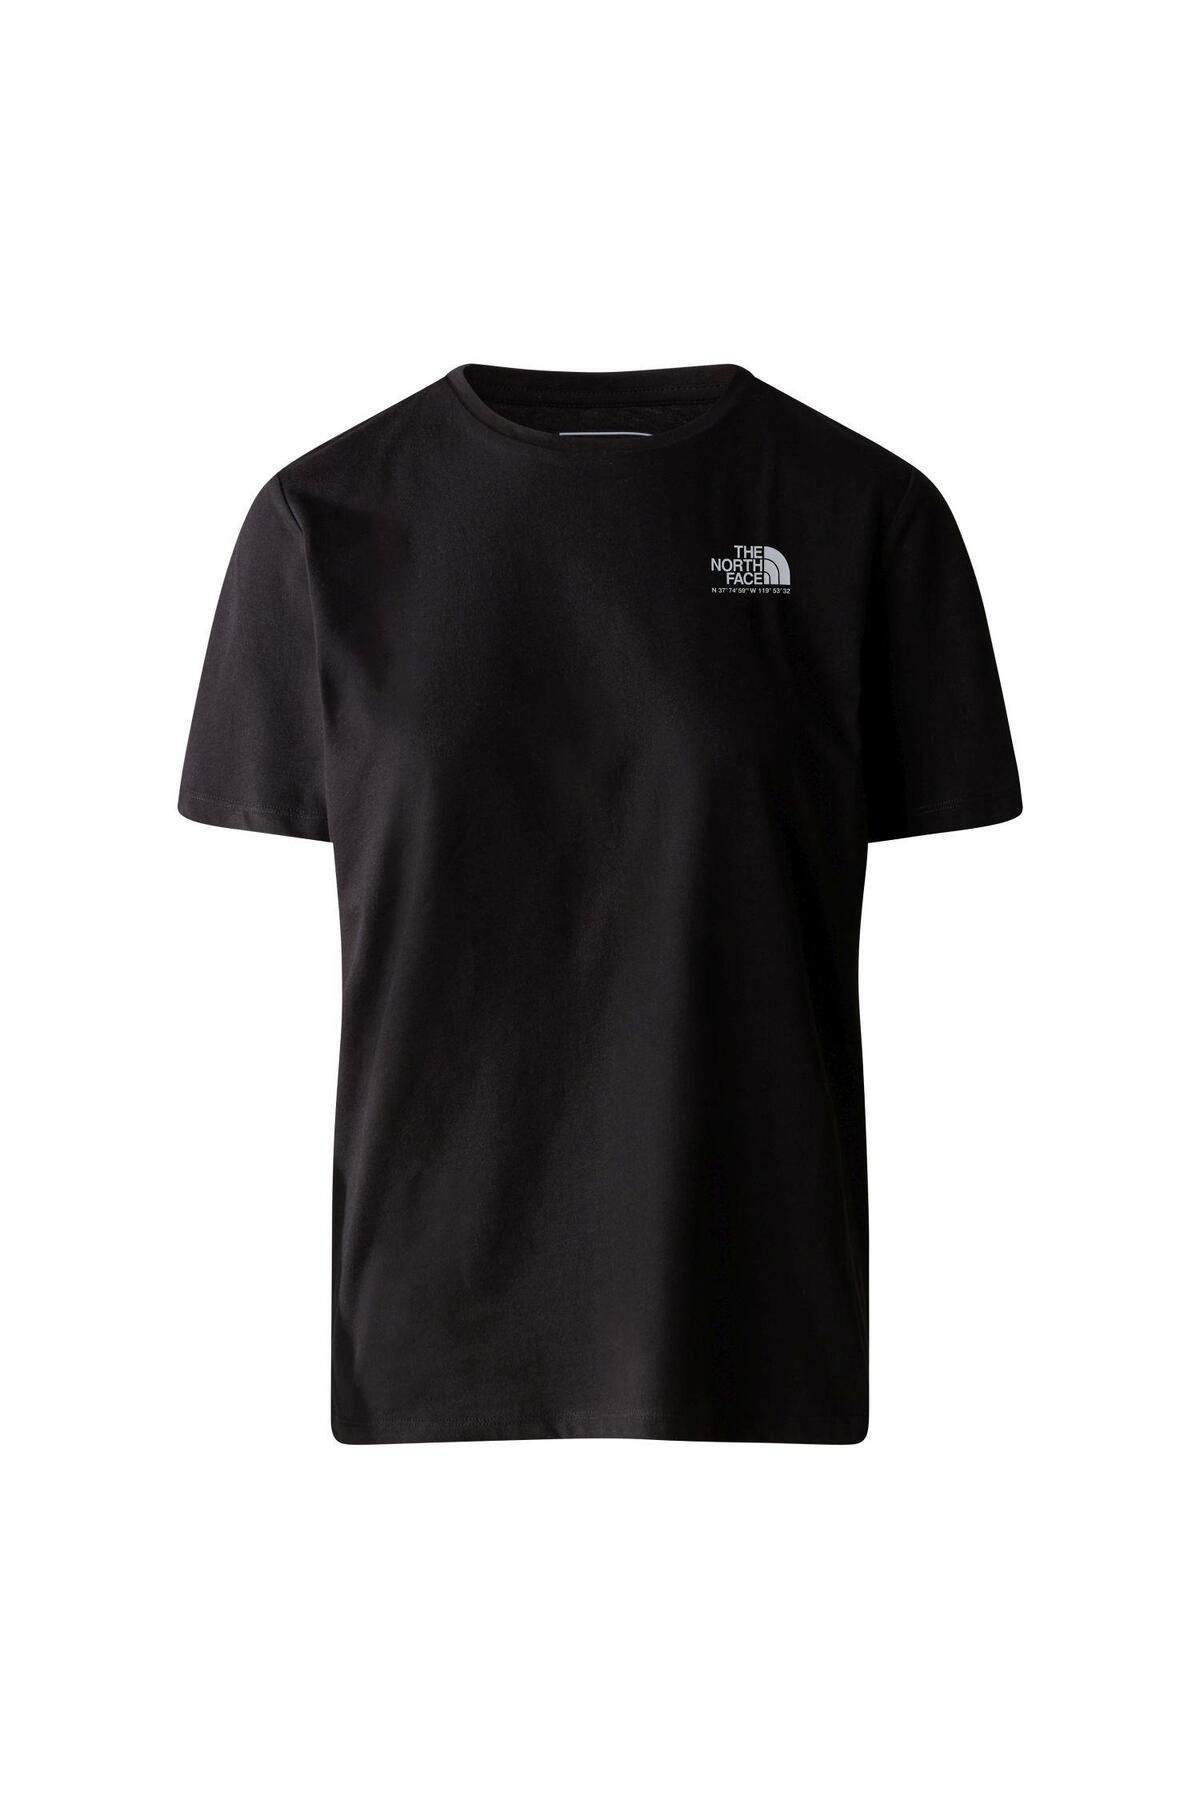 The North Face W FOUNDATION GRAPHIC TEE - EU  T-Shirt NF0A86XNKY41 Siyah-XS